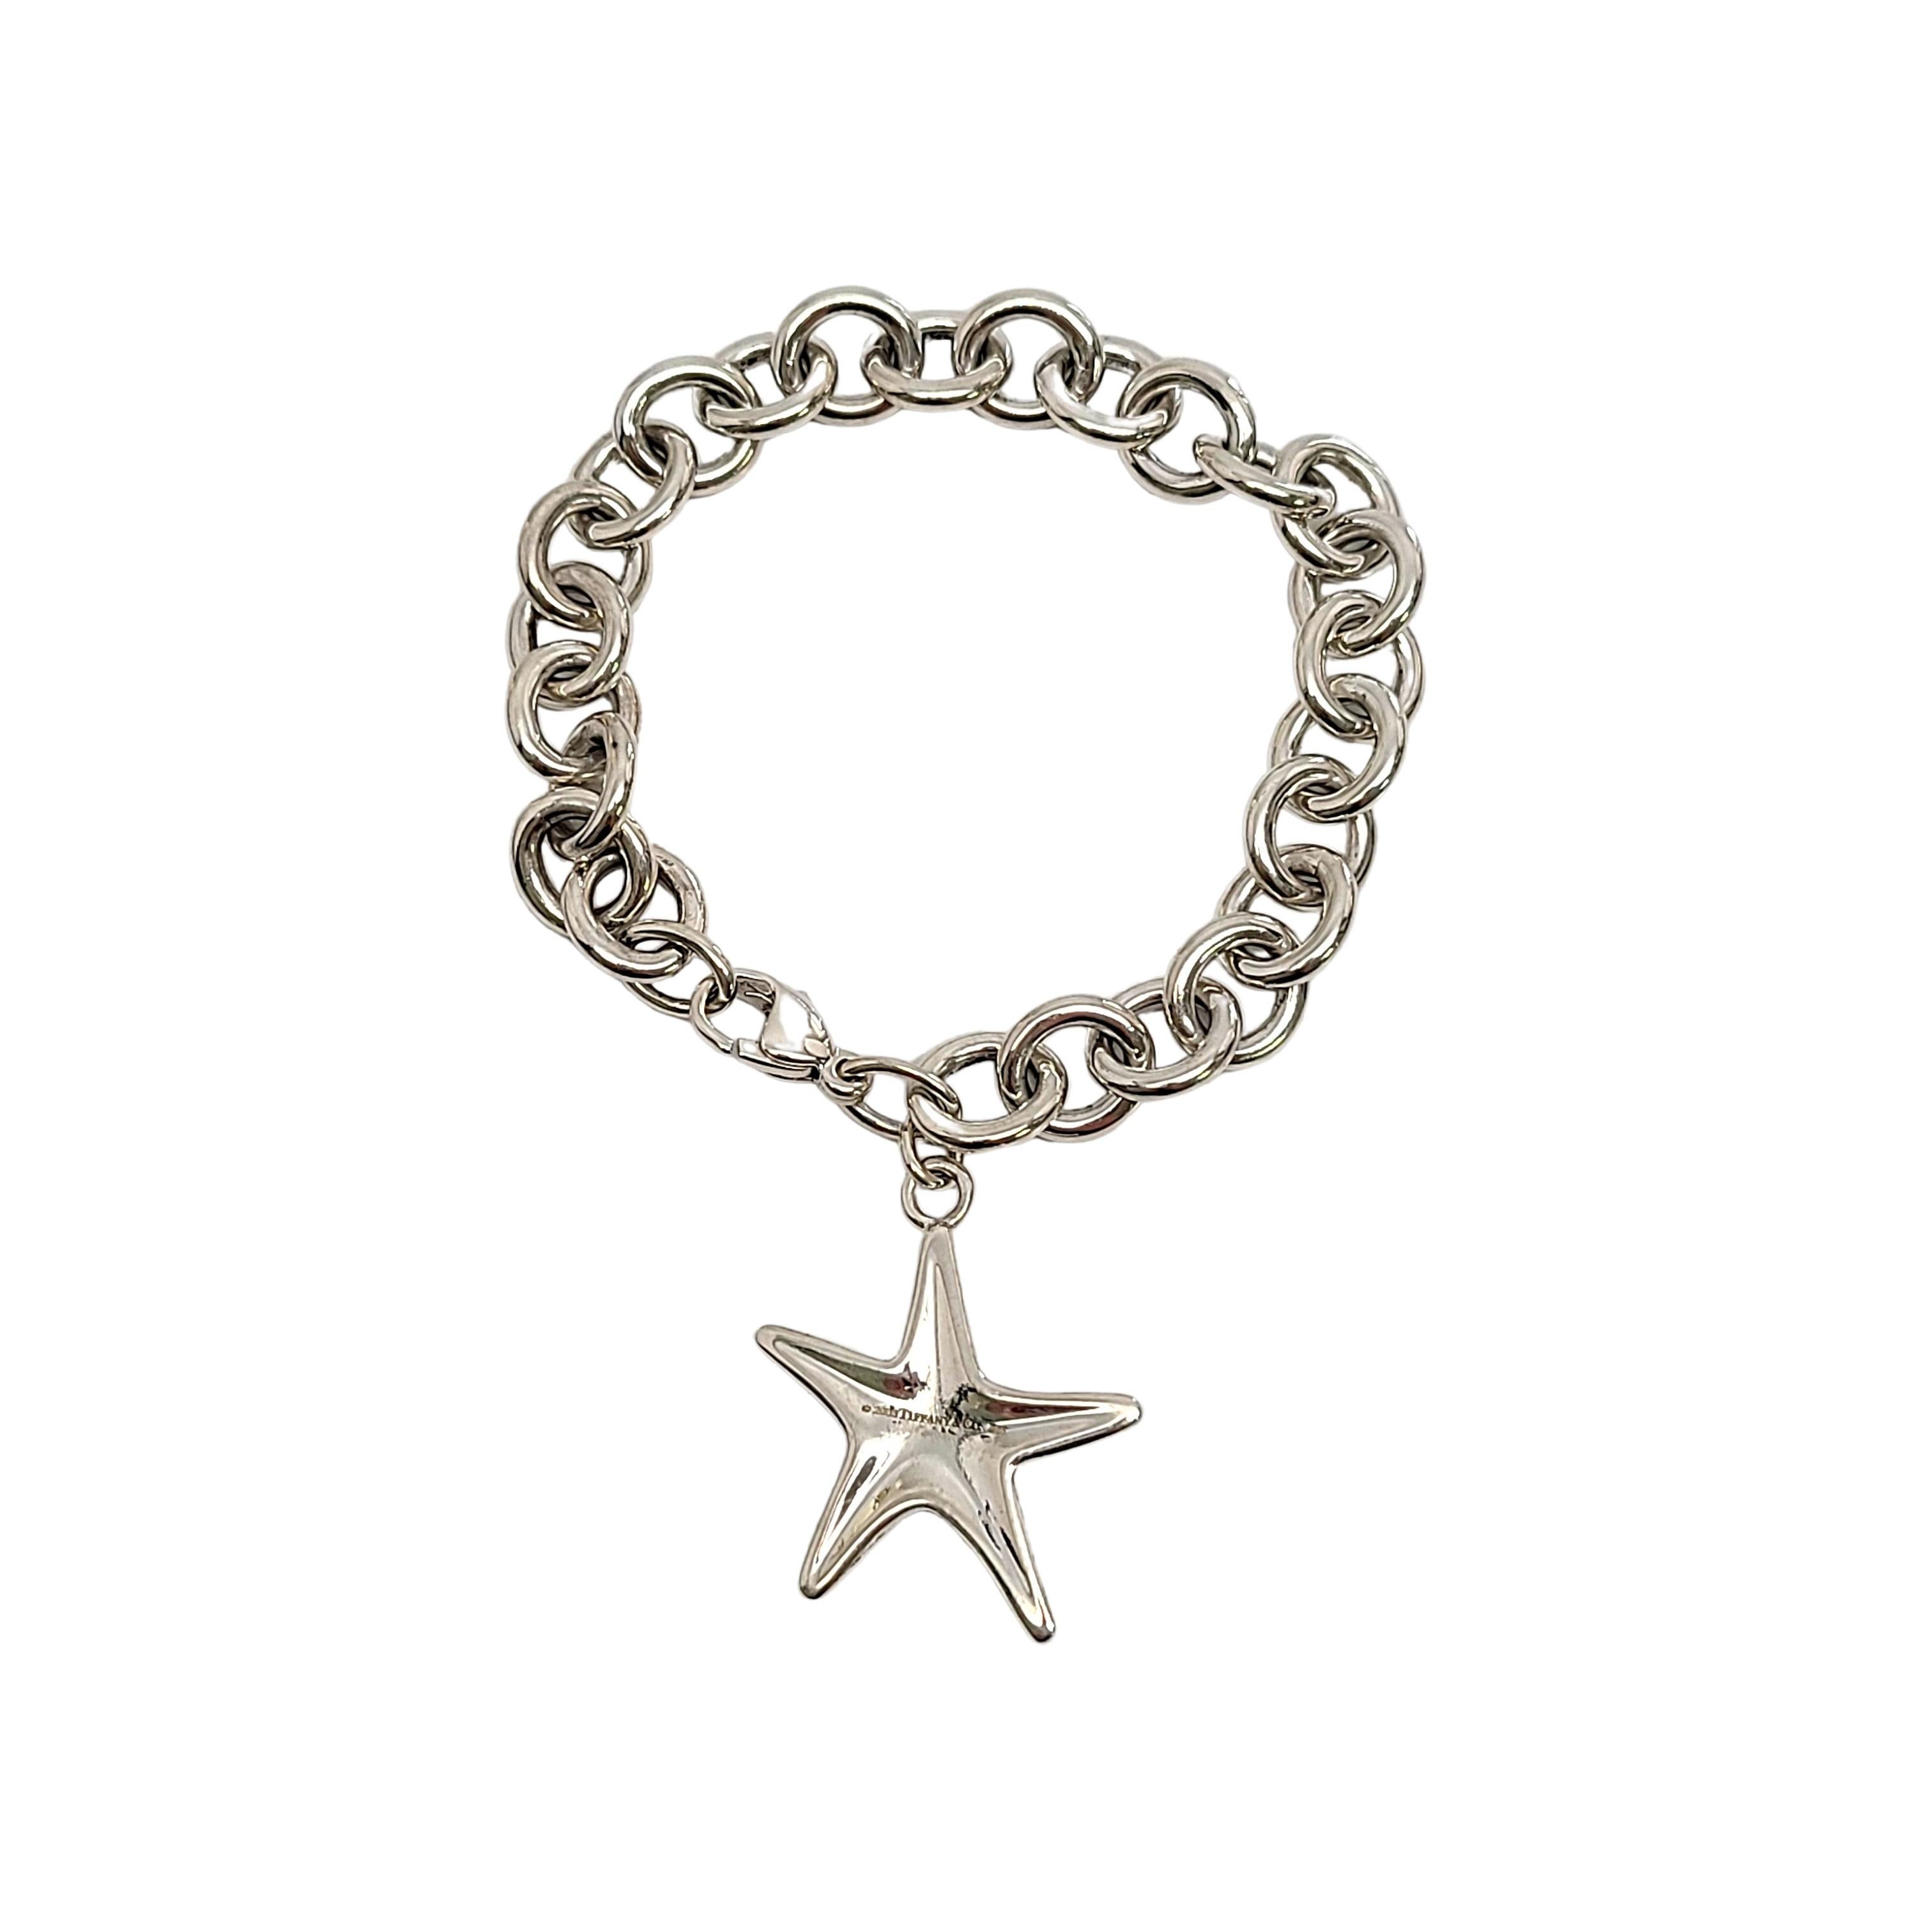 Sterling silver rolo link bracelet with starfish dangle by Tiffany & Co.

Authentic Tiffany rolo link bracelet with a danging starfish featuring a small turquoise bead at its center. Lobster claw closure. Tiffany box and pouch not